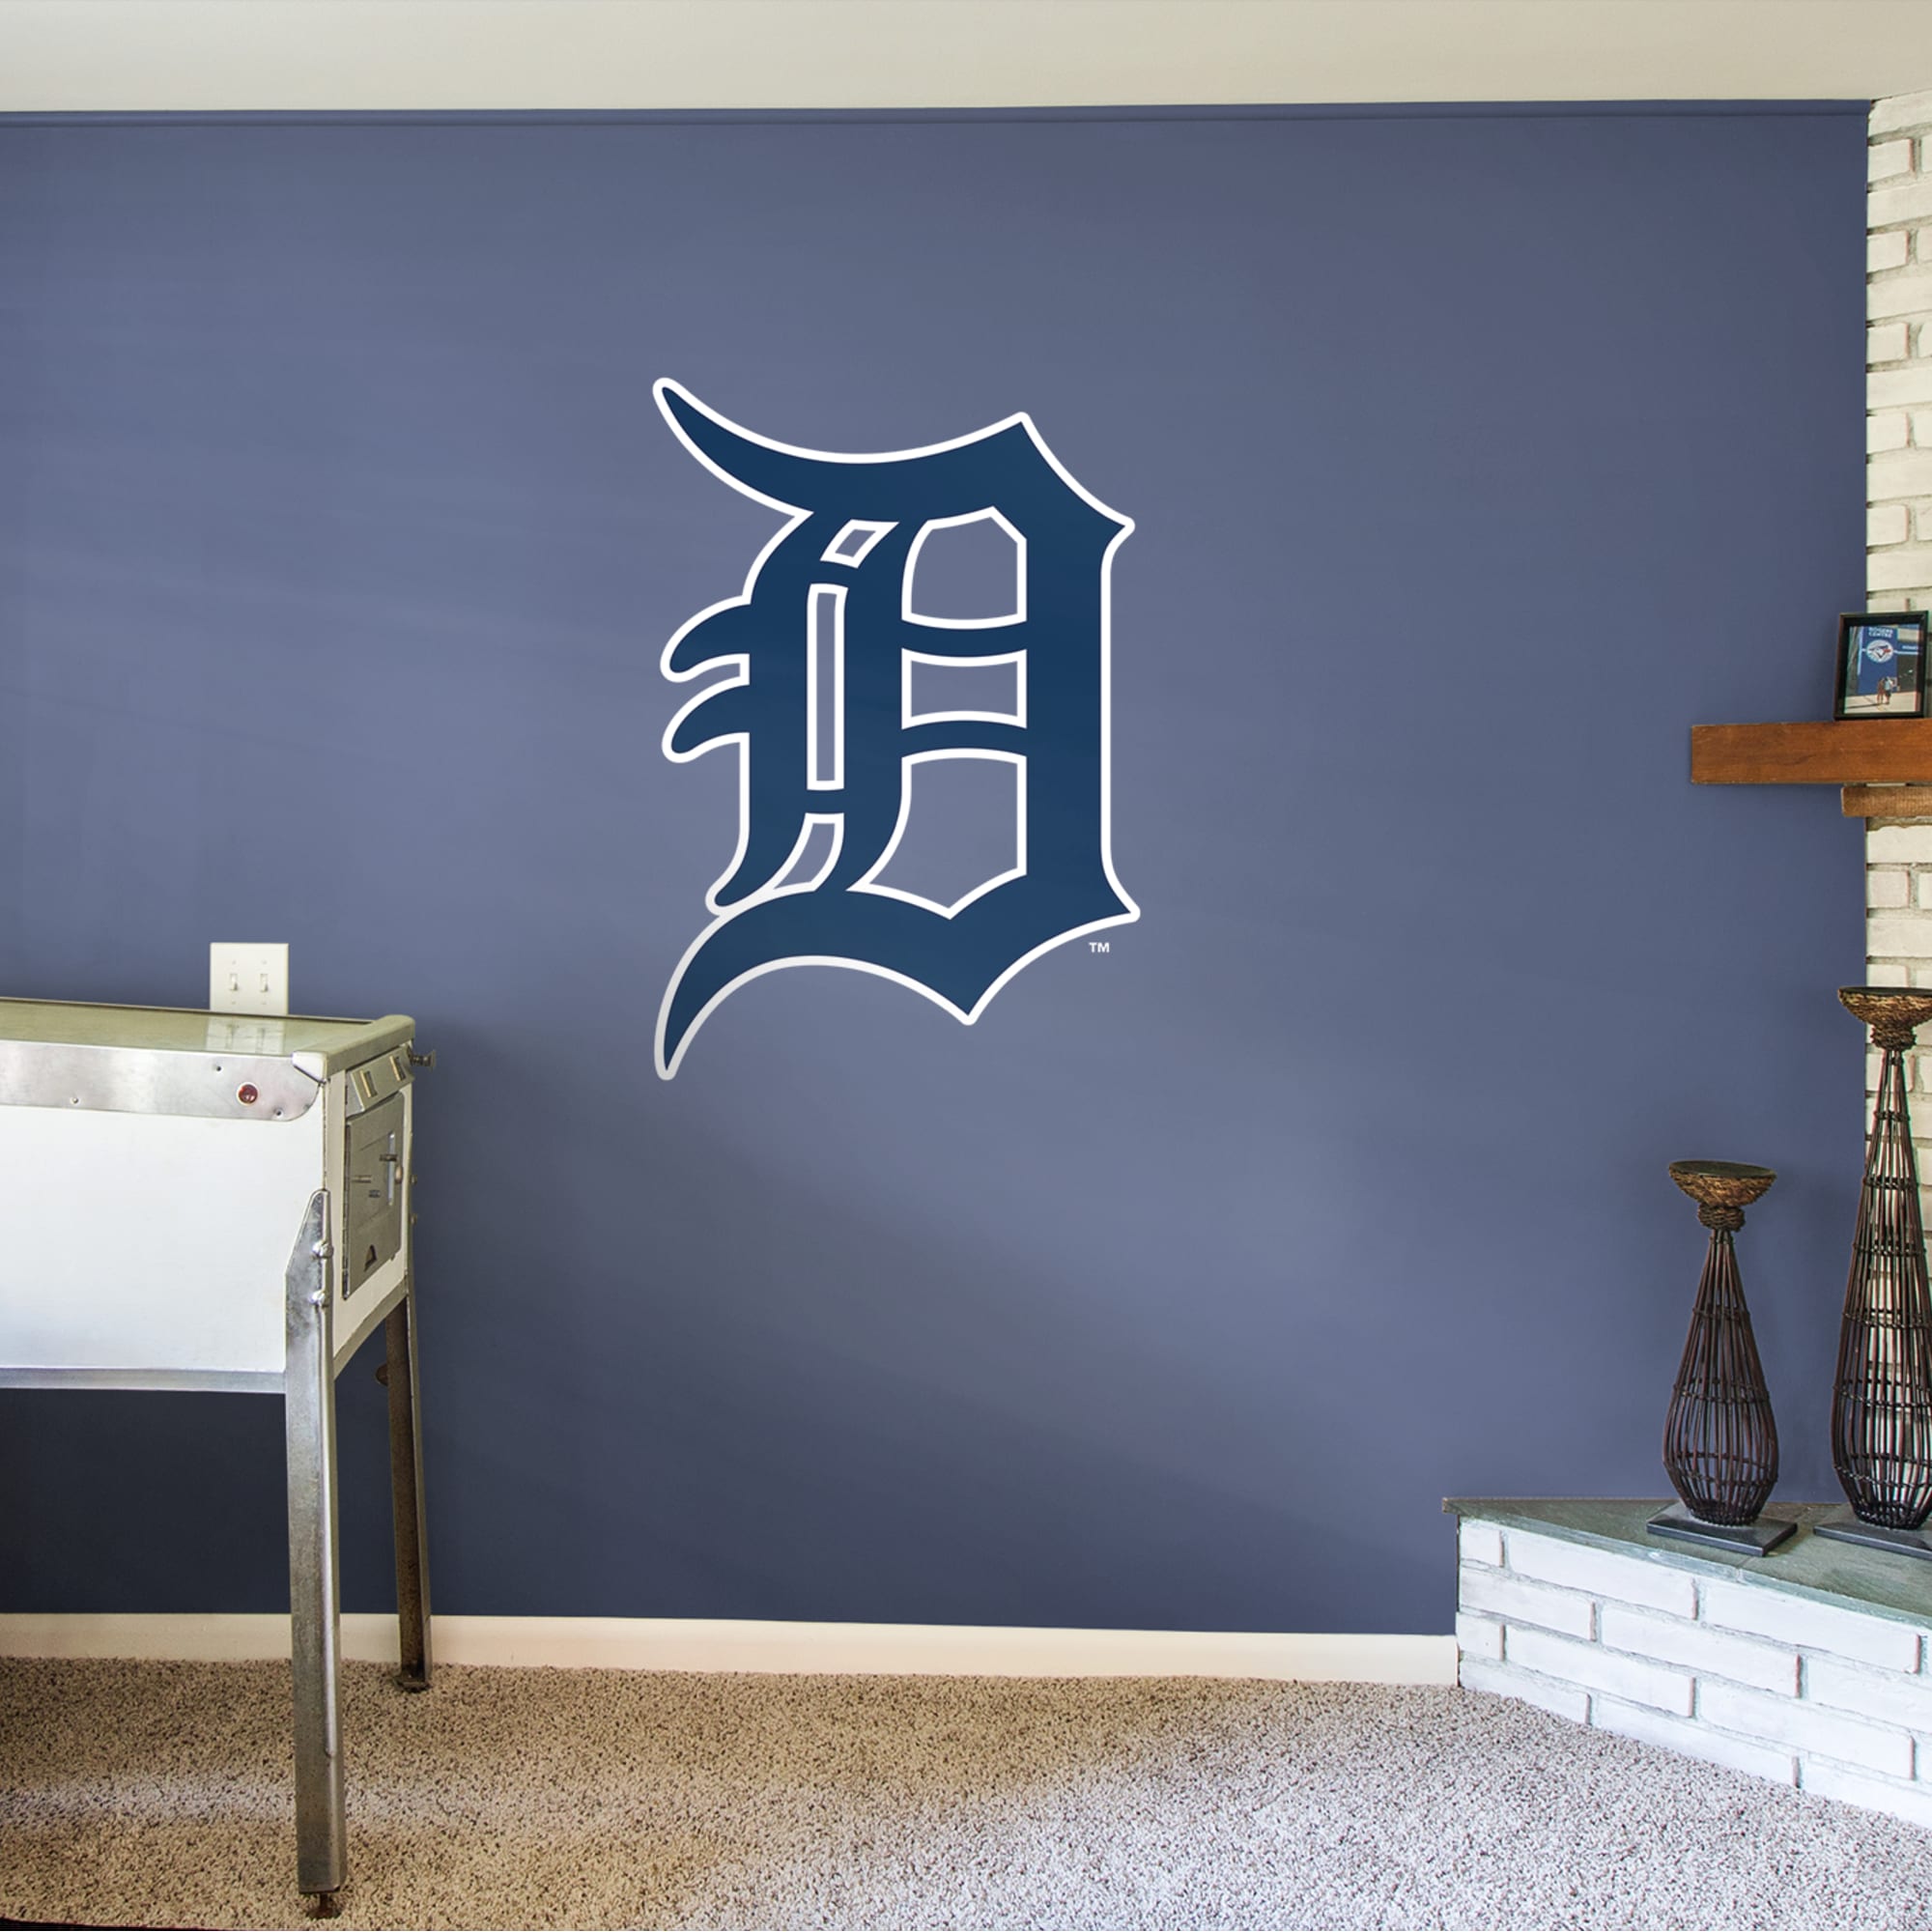 Detroit Tigers: Blue Old English D Logo - Officially Licensed MLB Removable Wall Decal by Fathead | Vinyl